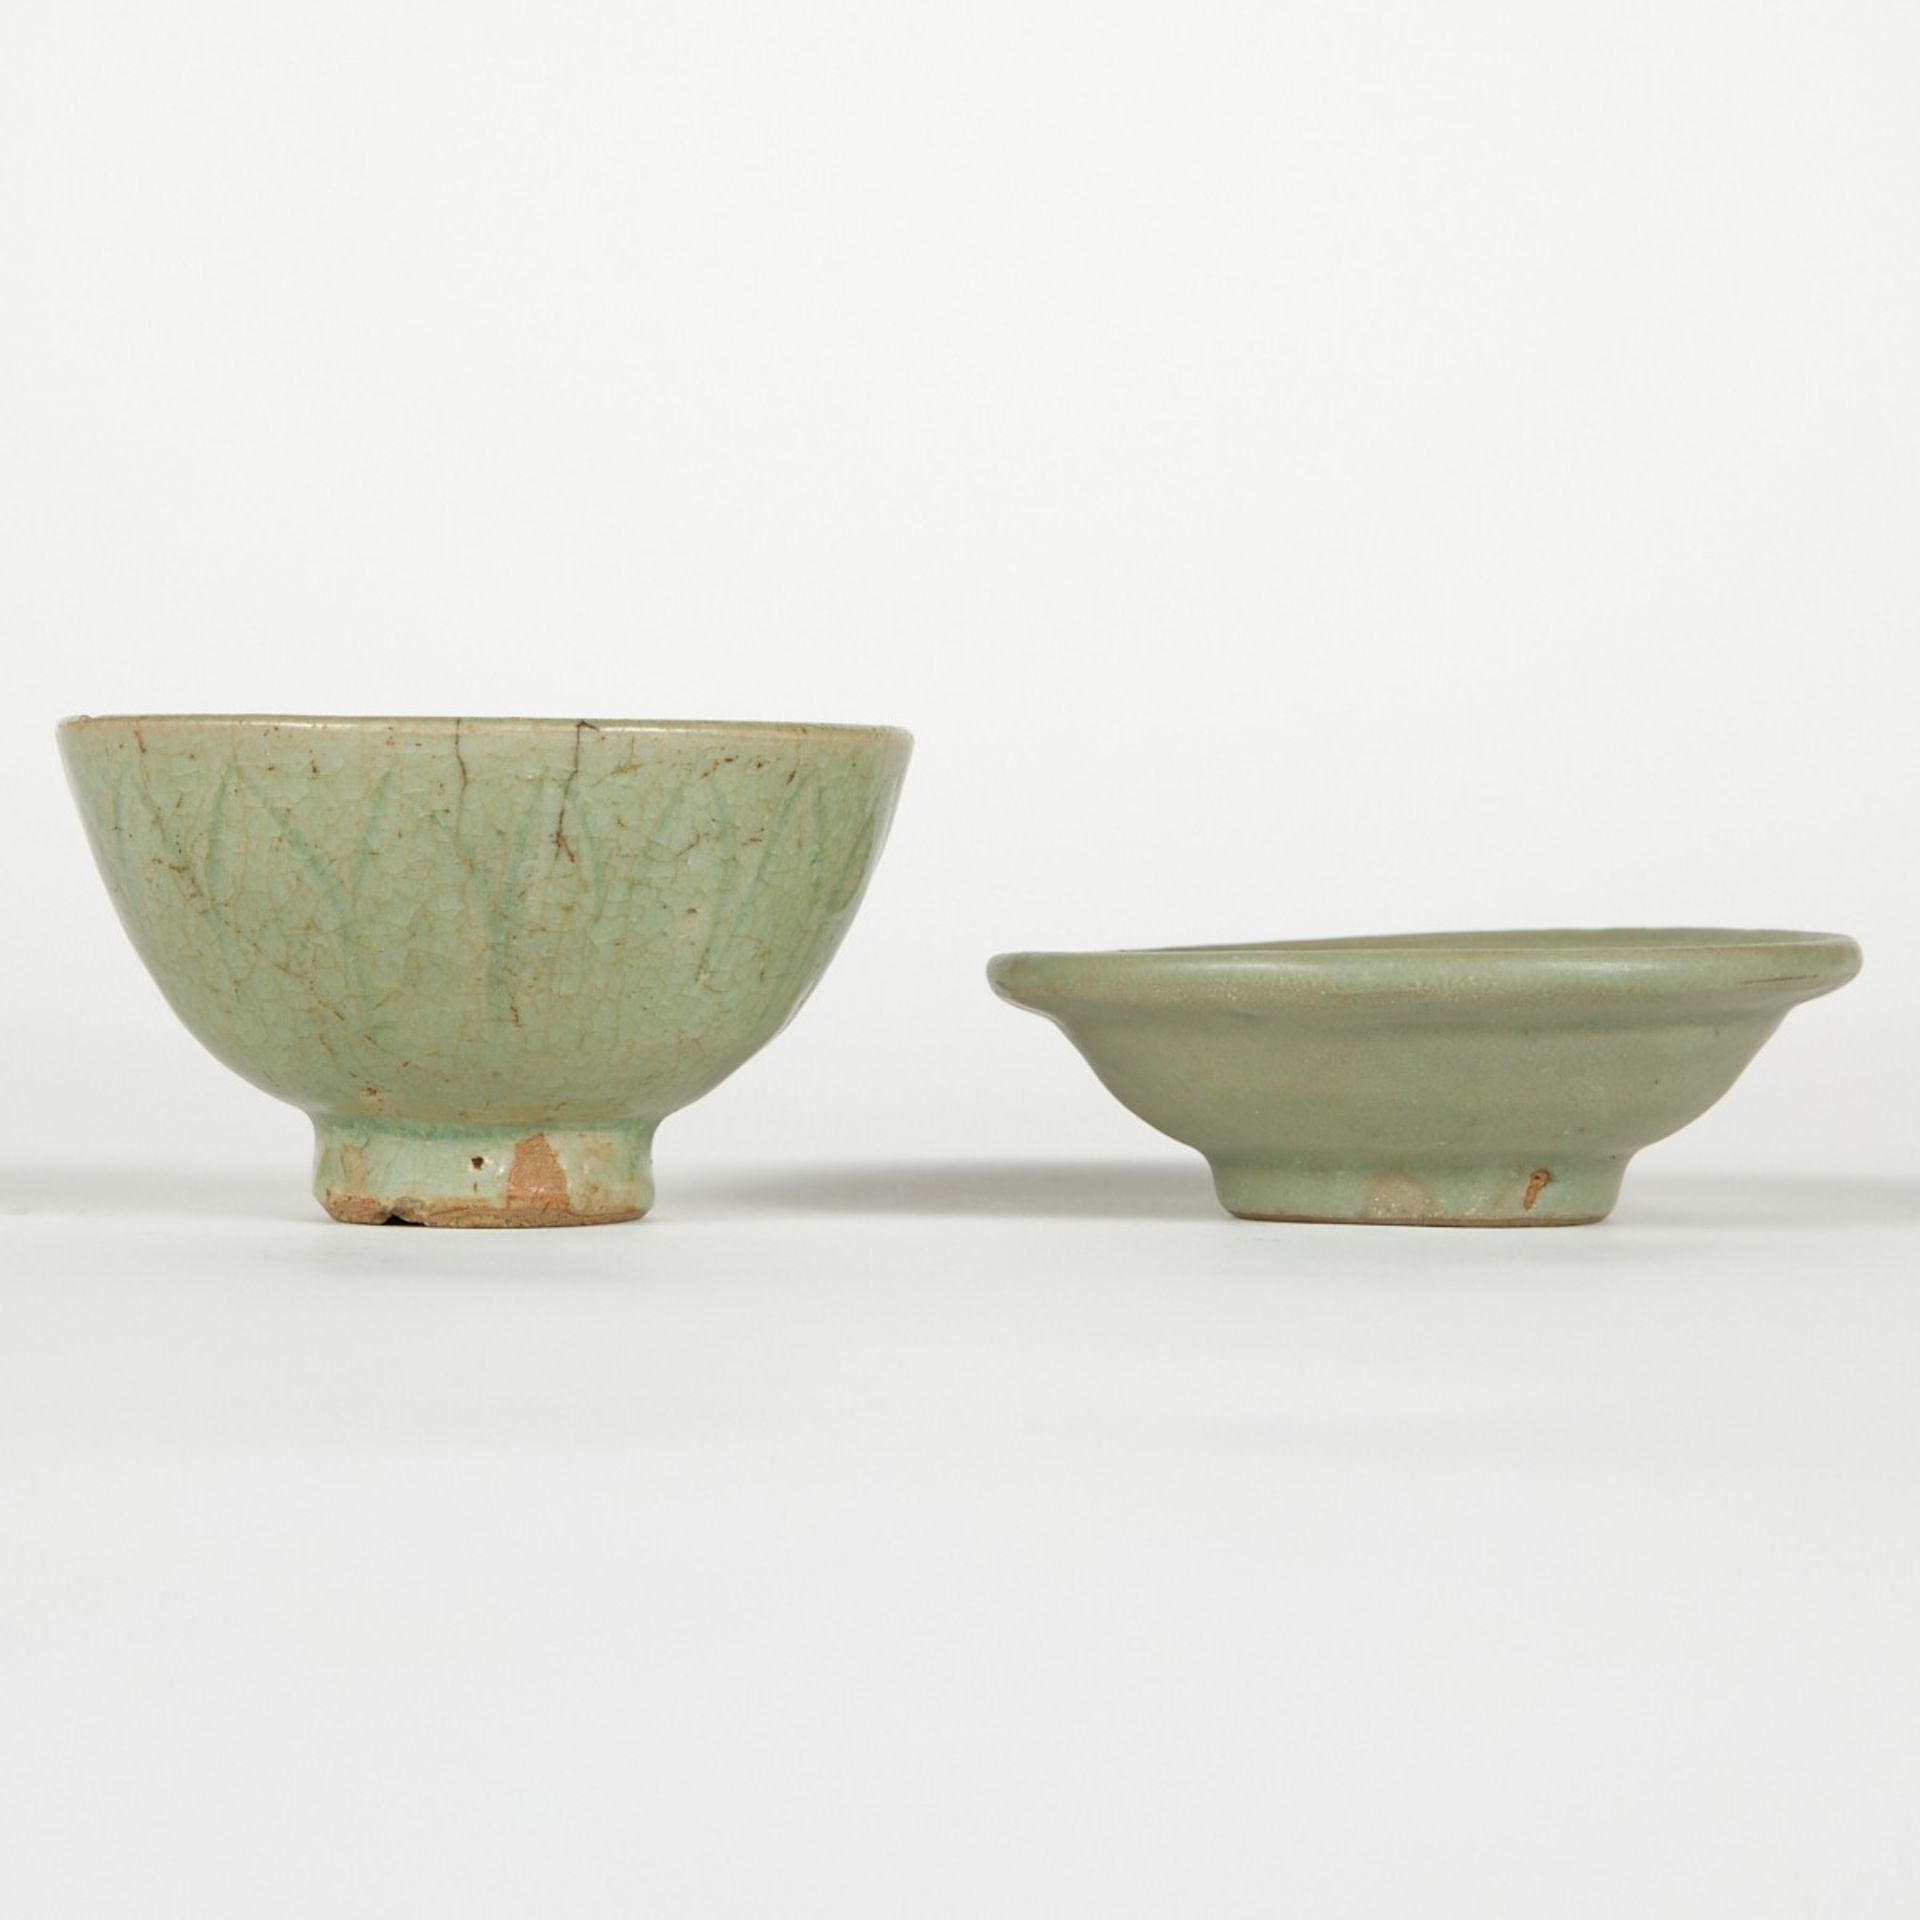 Grp: 2 Chinese Ming Dynasty Lonquan Celadon Dishes - Image 4 of 8